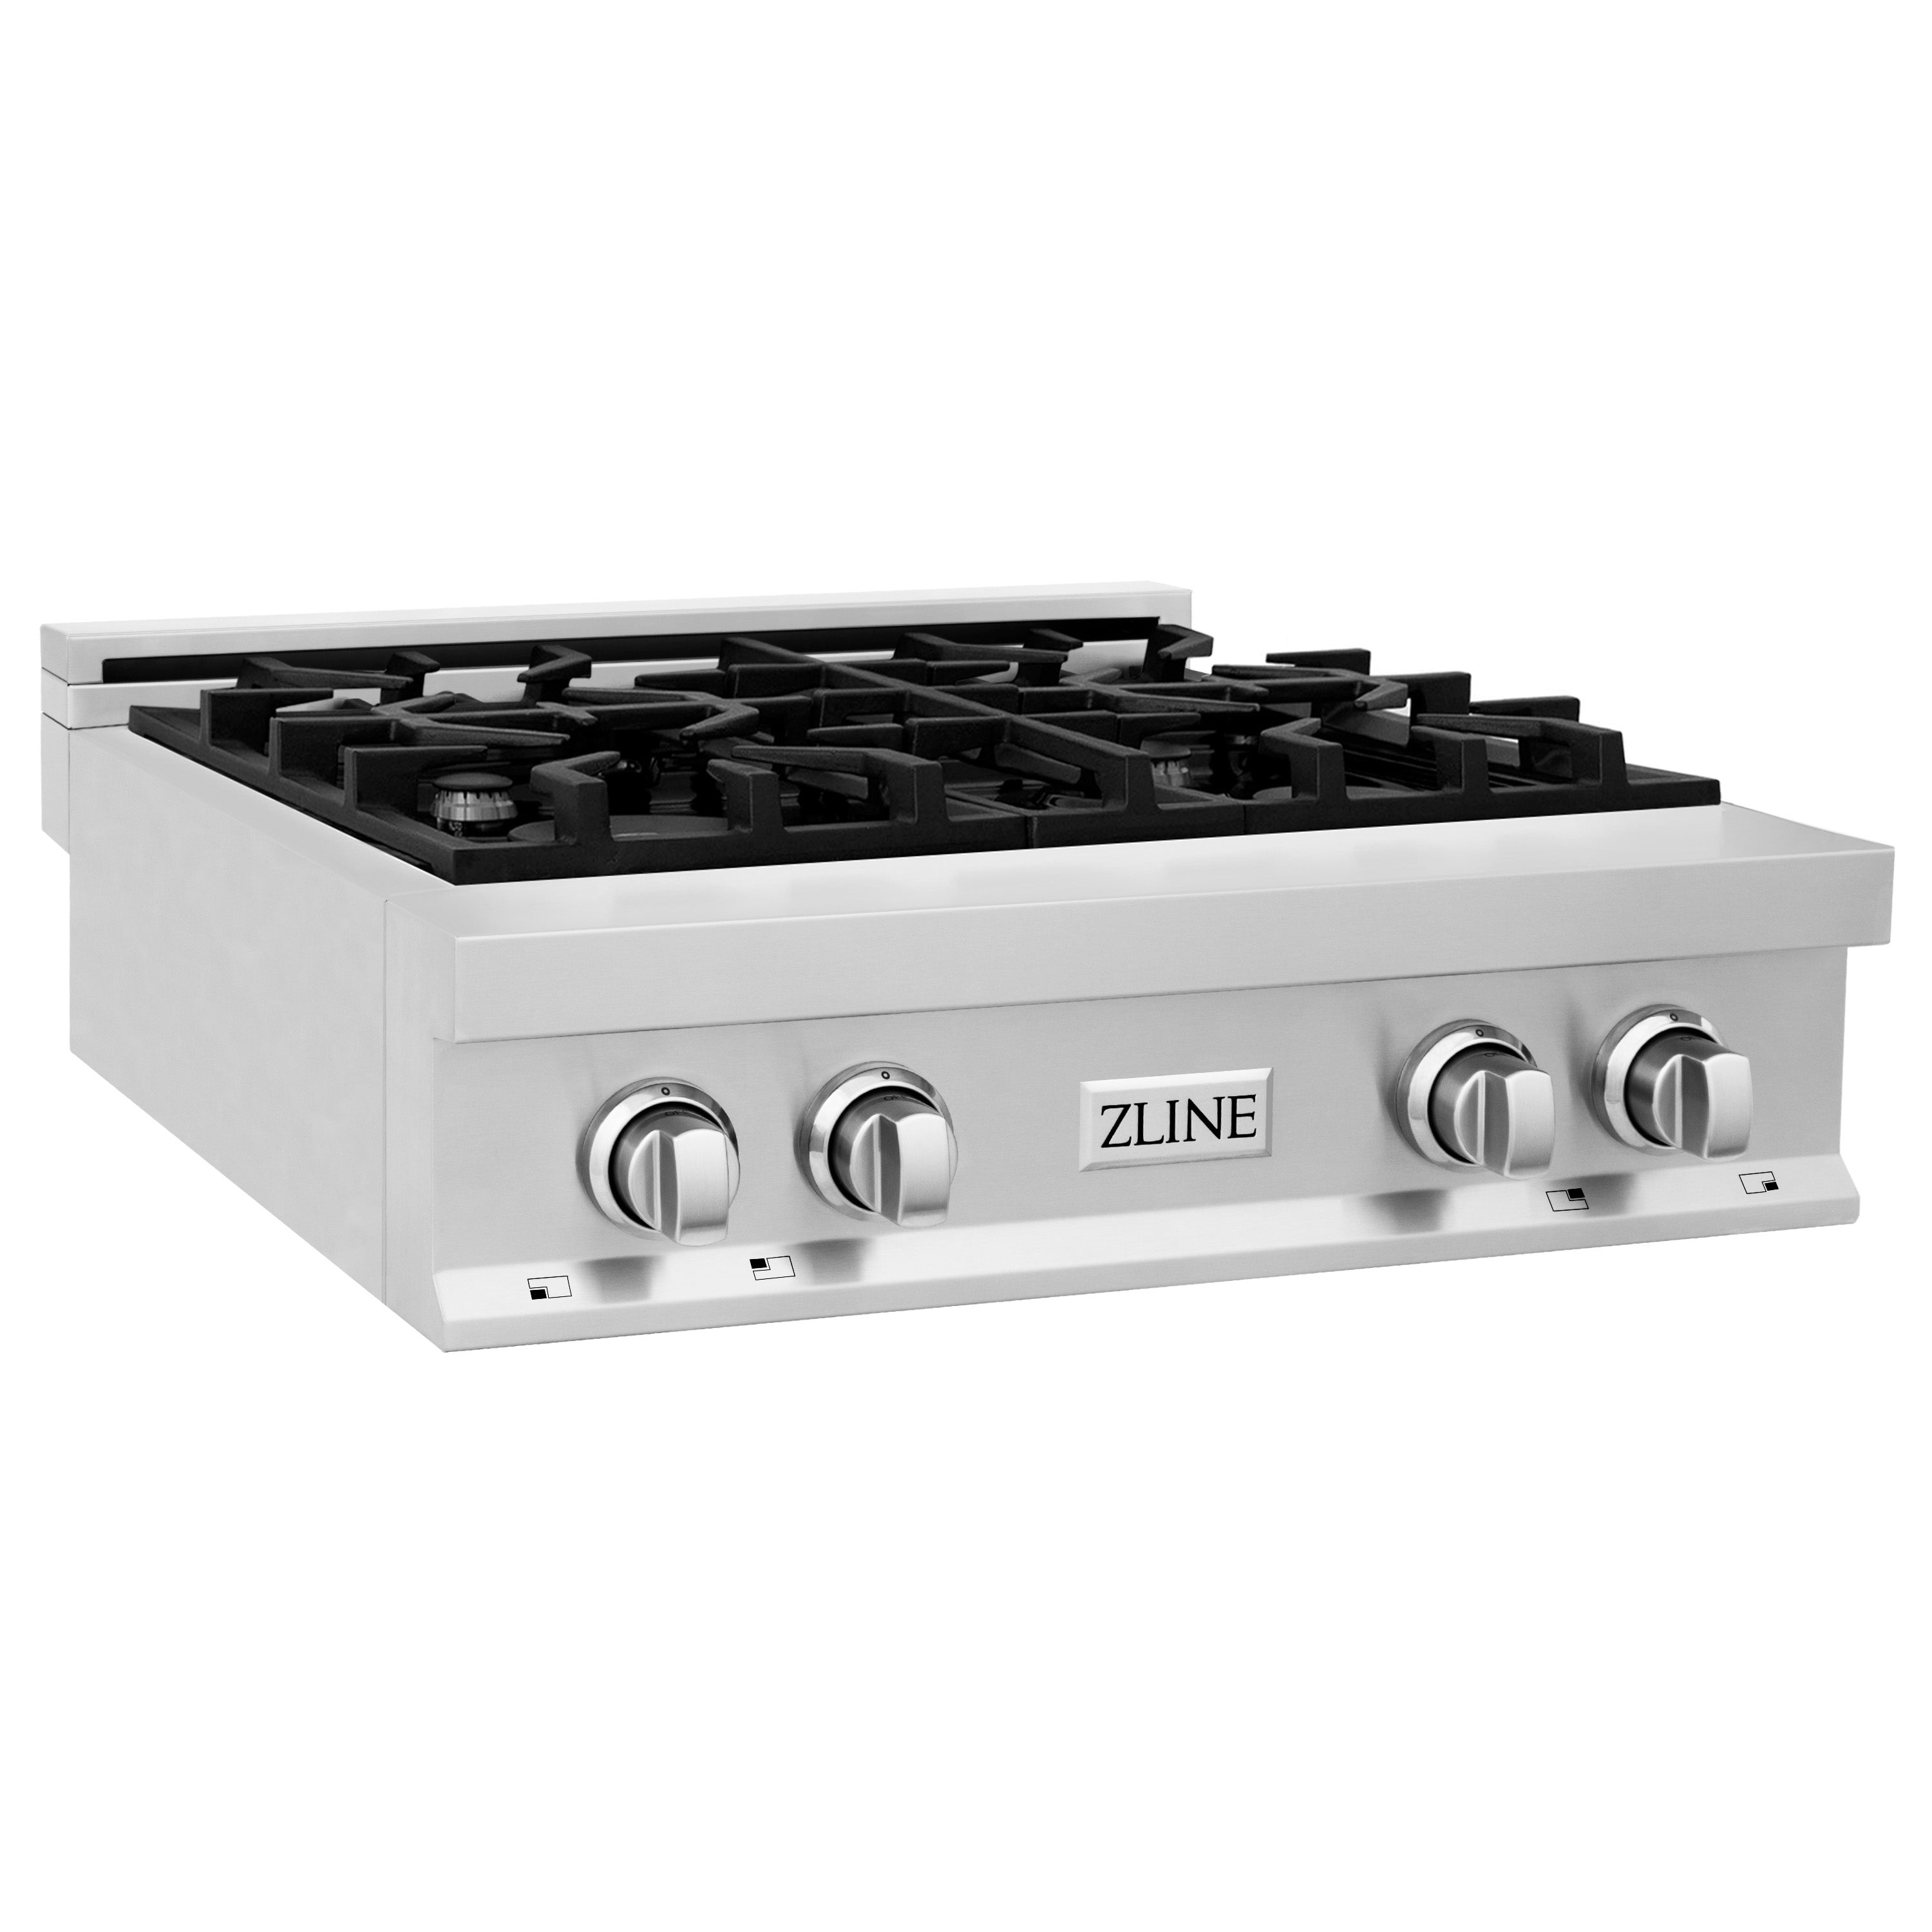 ZLINE 30" Porcelain Gas Stovetop with 4 Gas Burners (RT30)